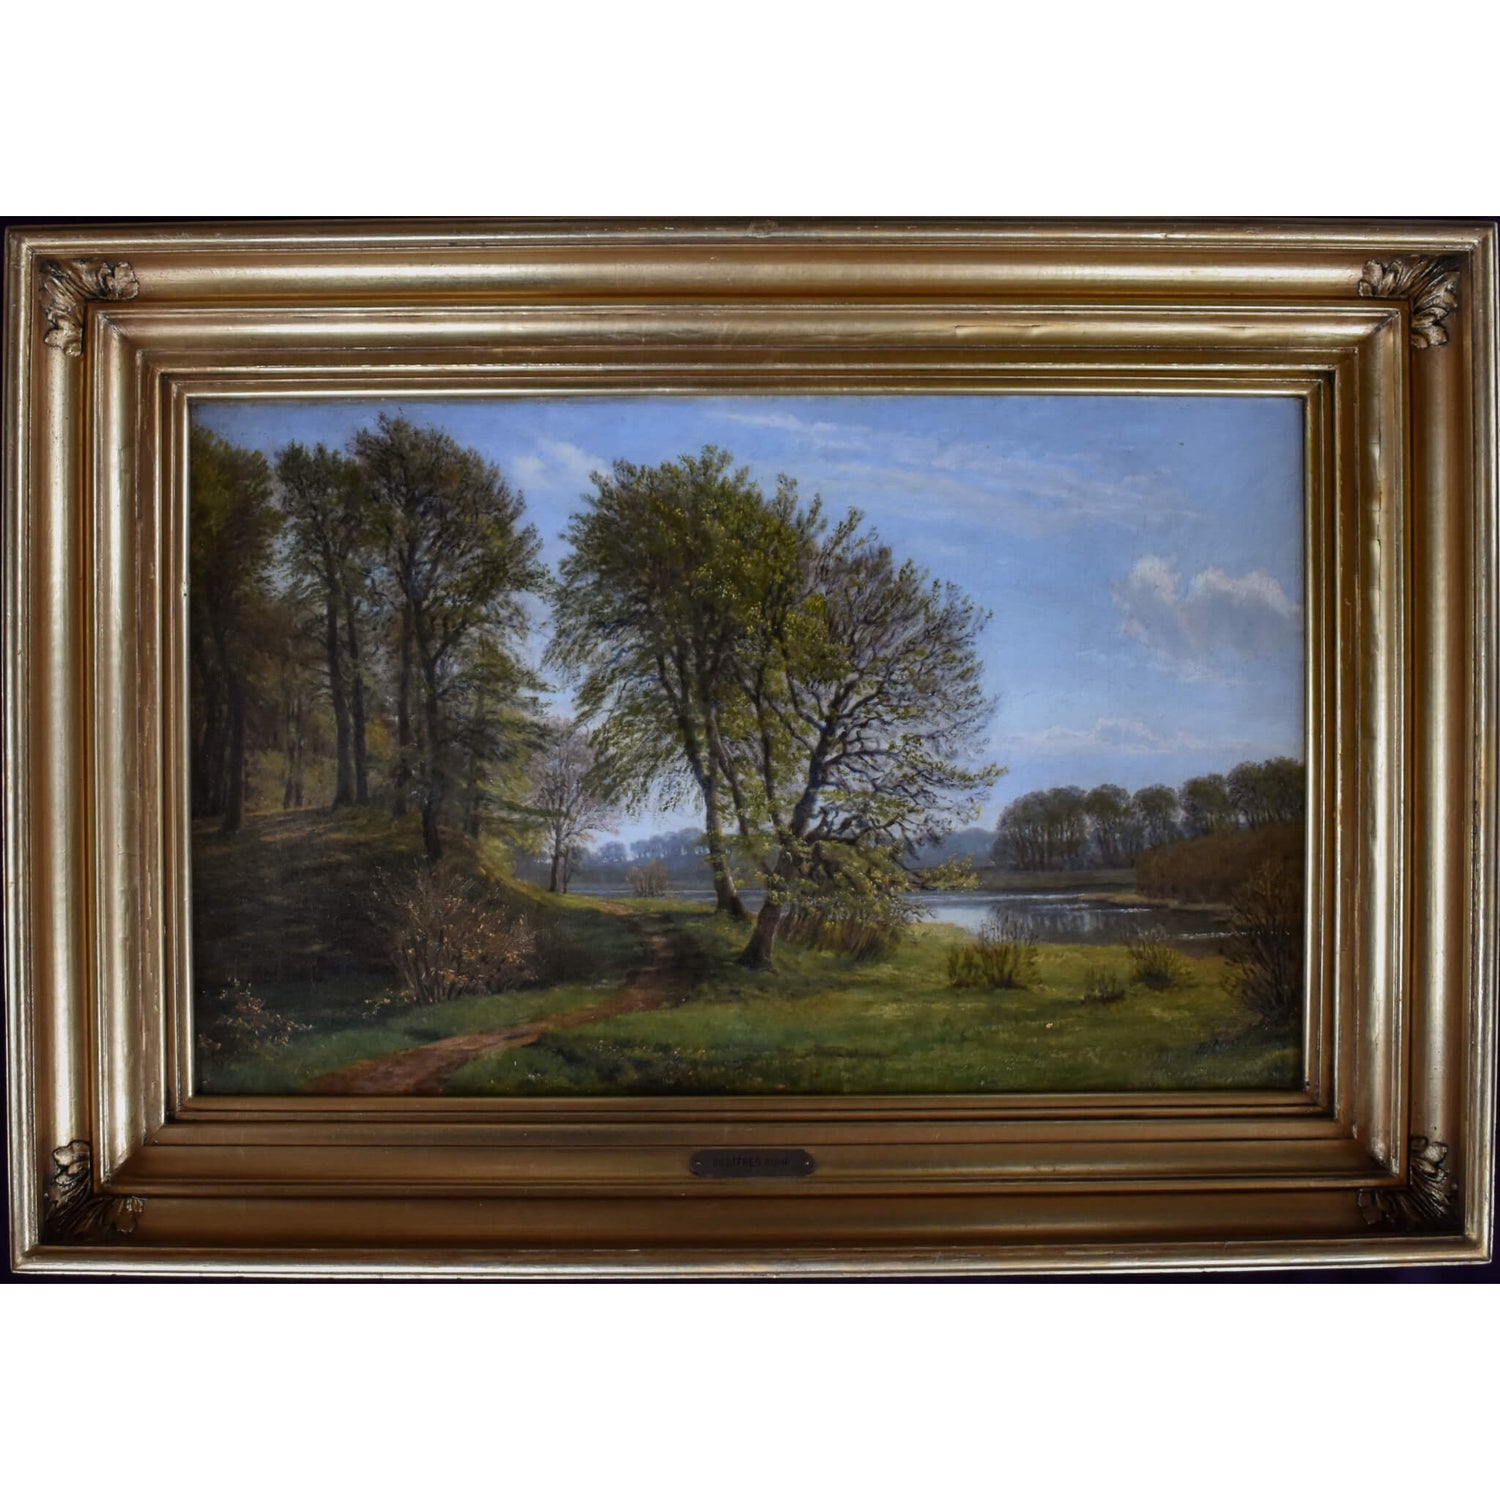 Late 19th century oil painting by Danish artist Godtfred Rump depicting a river landscape for sale at Winckelmann Gallery